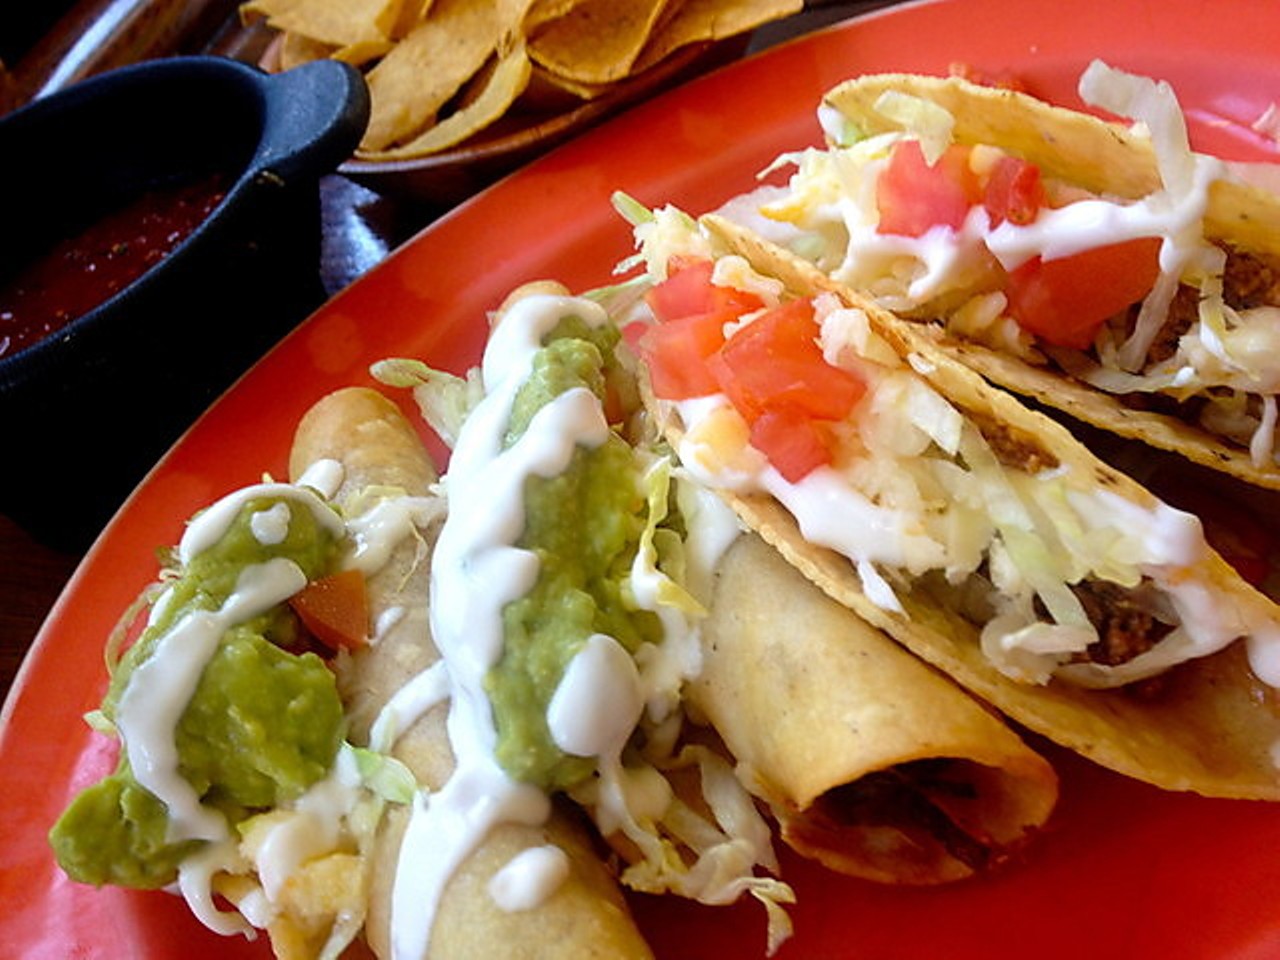 Ditch Taco Bell and go for a tastier and more authentic Mexican option with Luchita’s. Sometimes a little South of the Border lovin’ is all a body needs to recover. Get yours at 3456 W. 117th St.